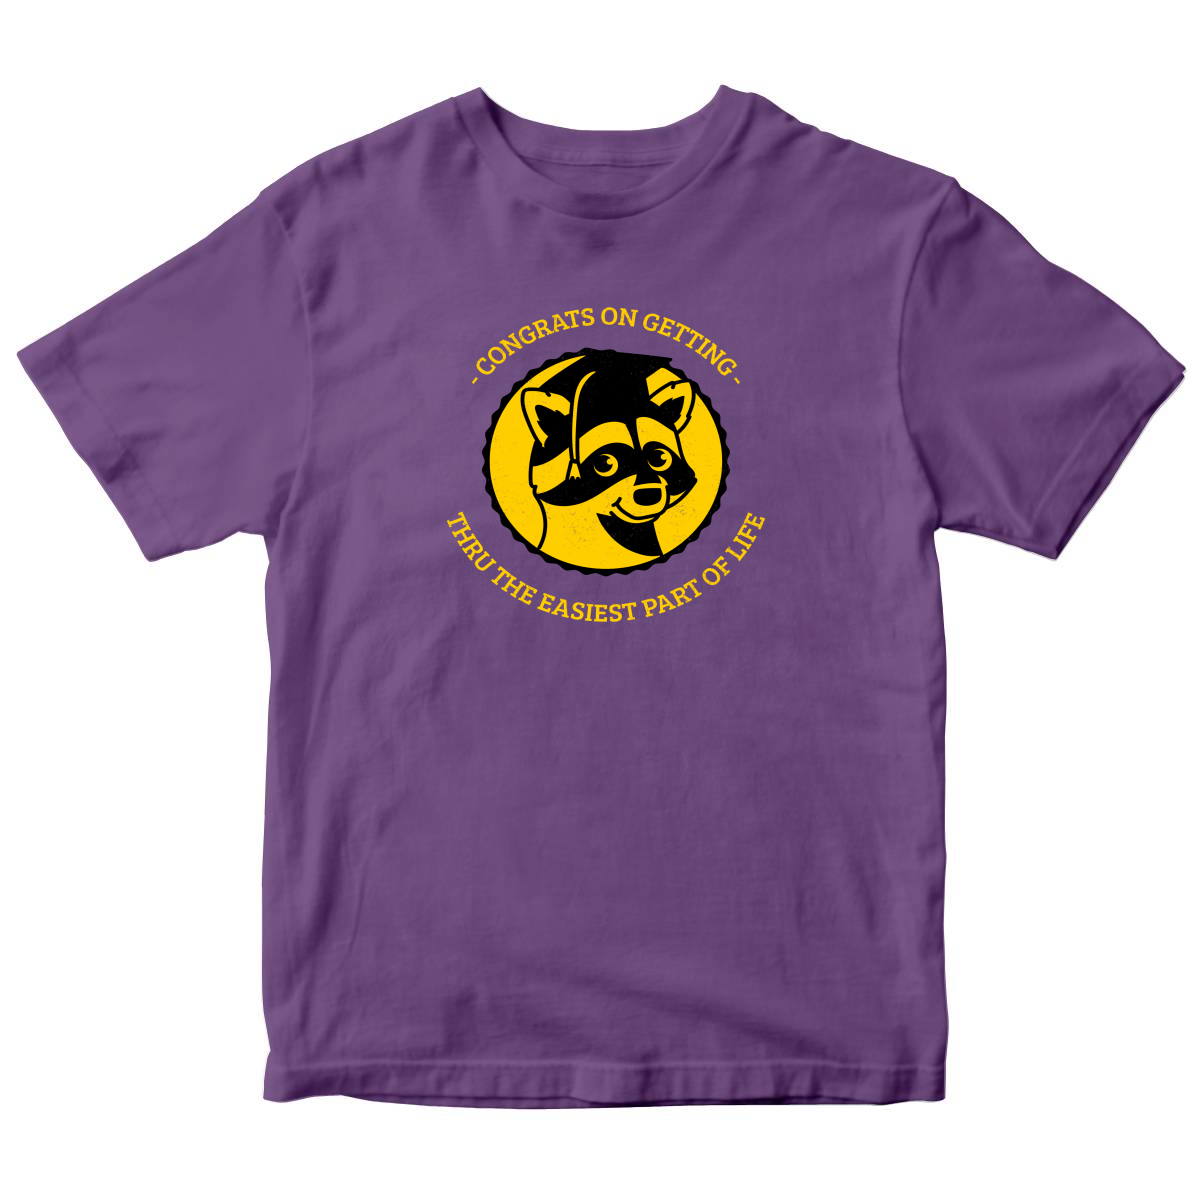 Congrats On Getting Thru The Easiest Part Of Life Kids T-shirt | Purple